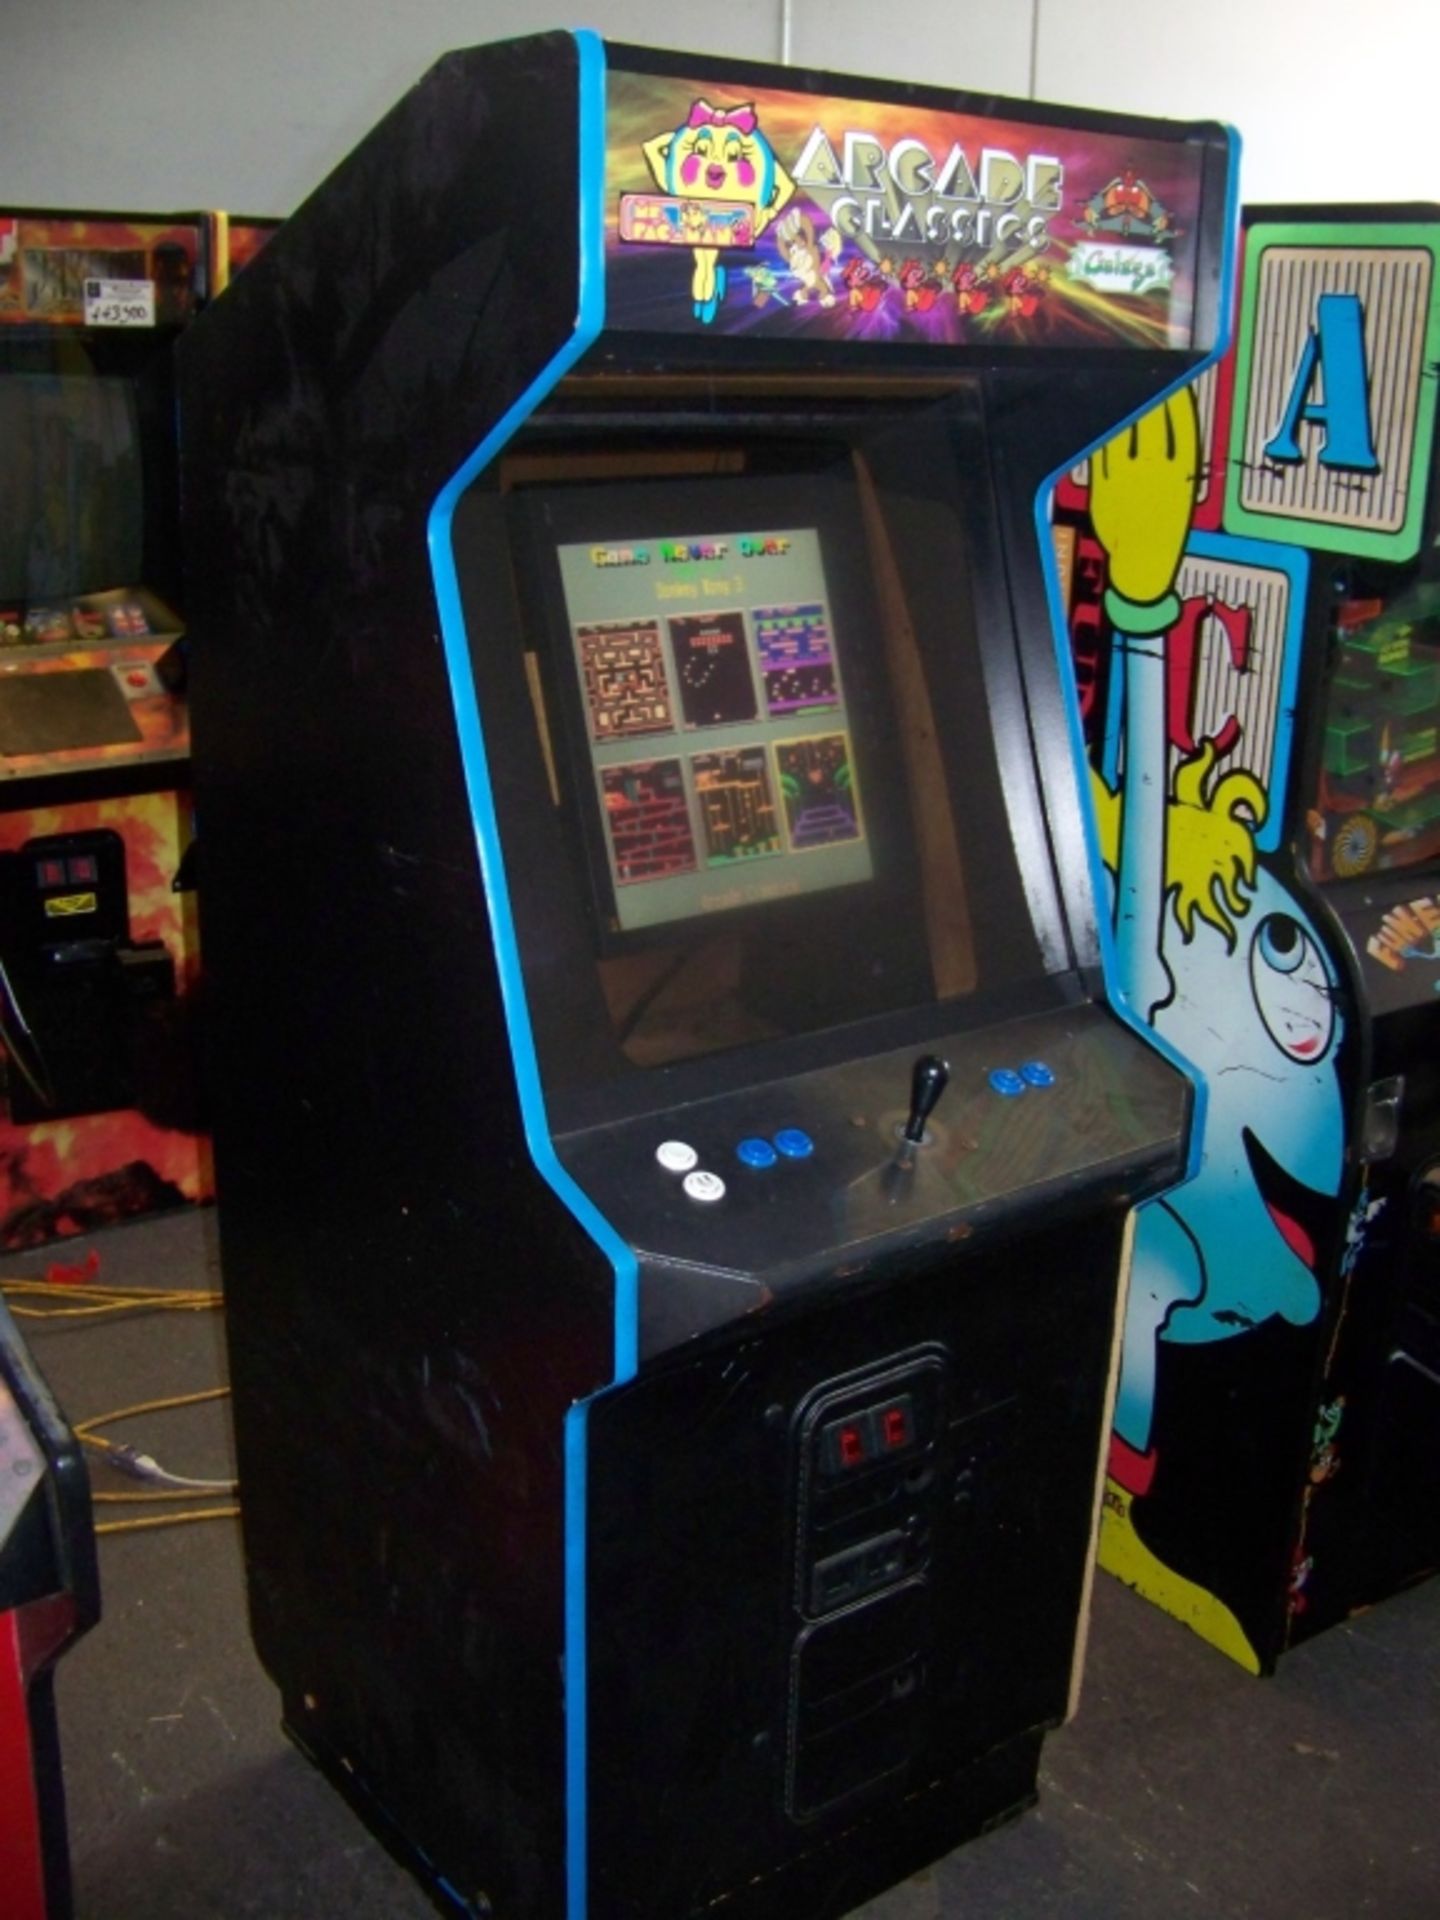 42 IN 1 MULTICADE UPRIGHT ARCADE  19" LCD MONITOR - Image 6 of 7